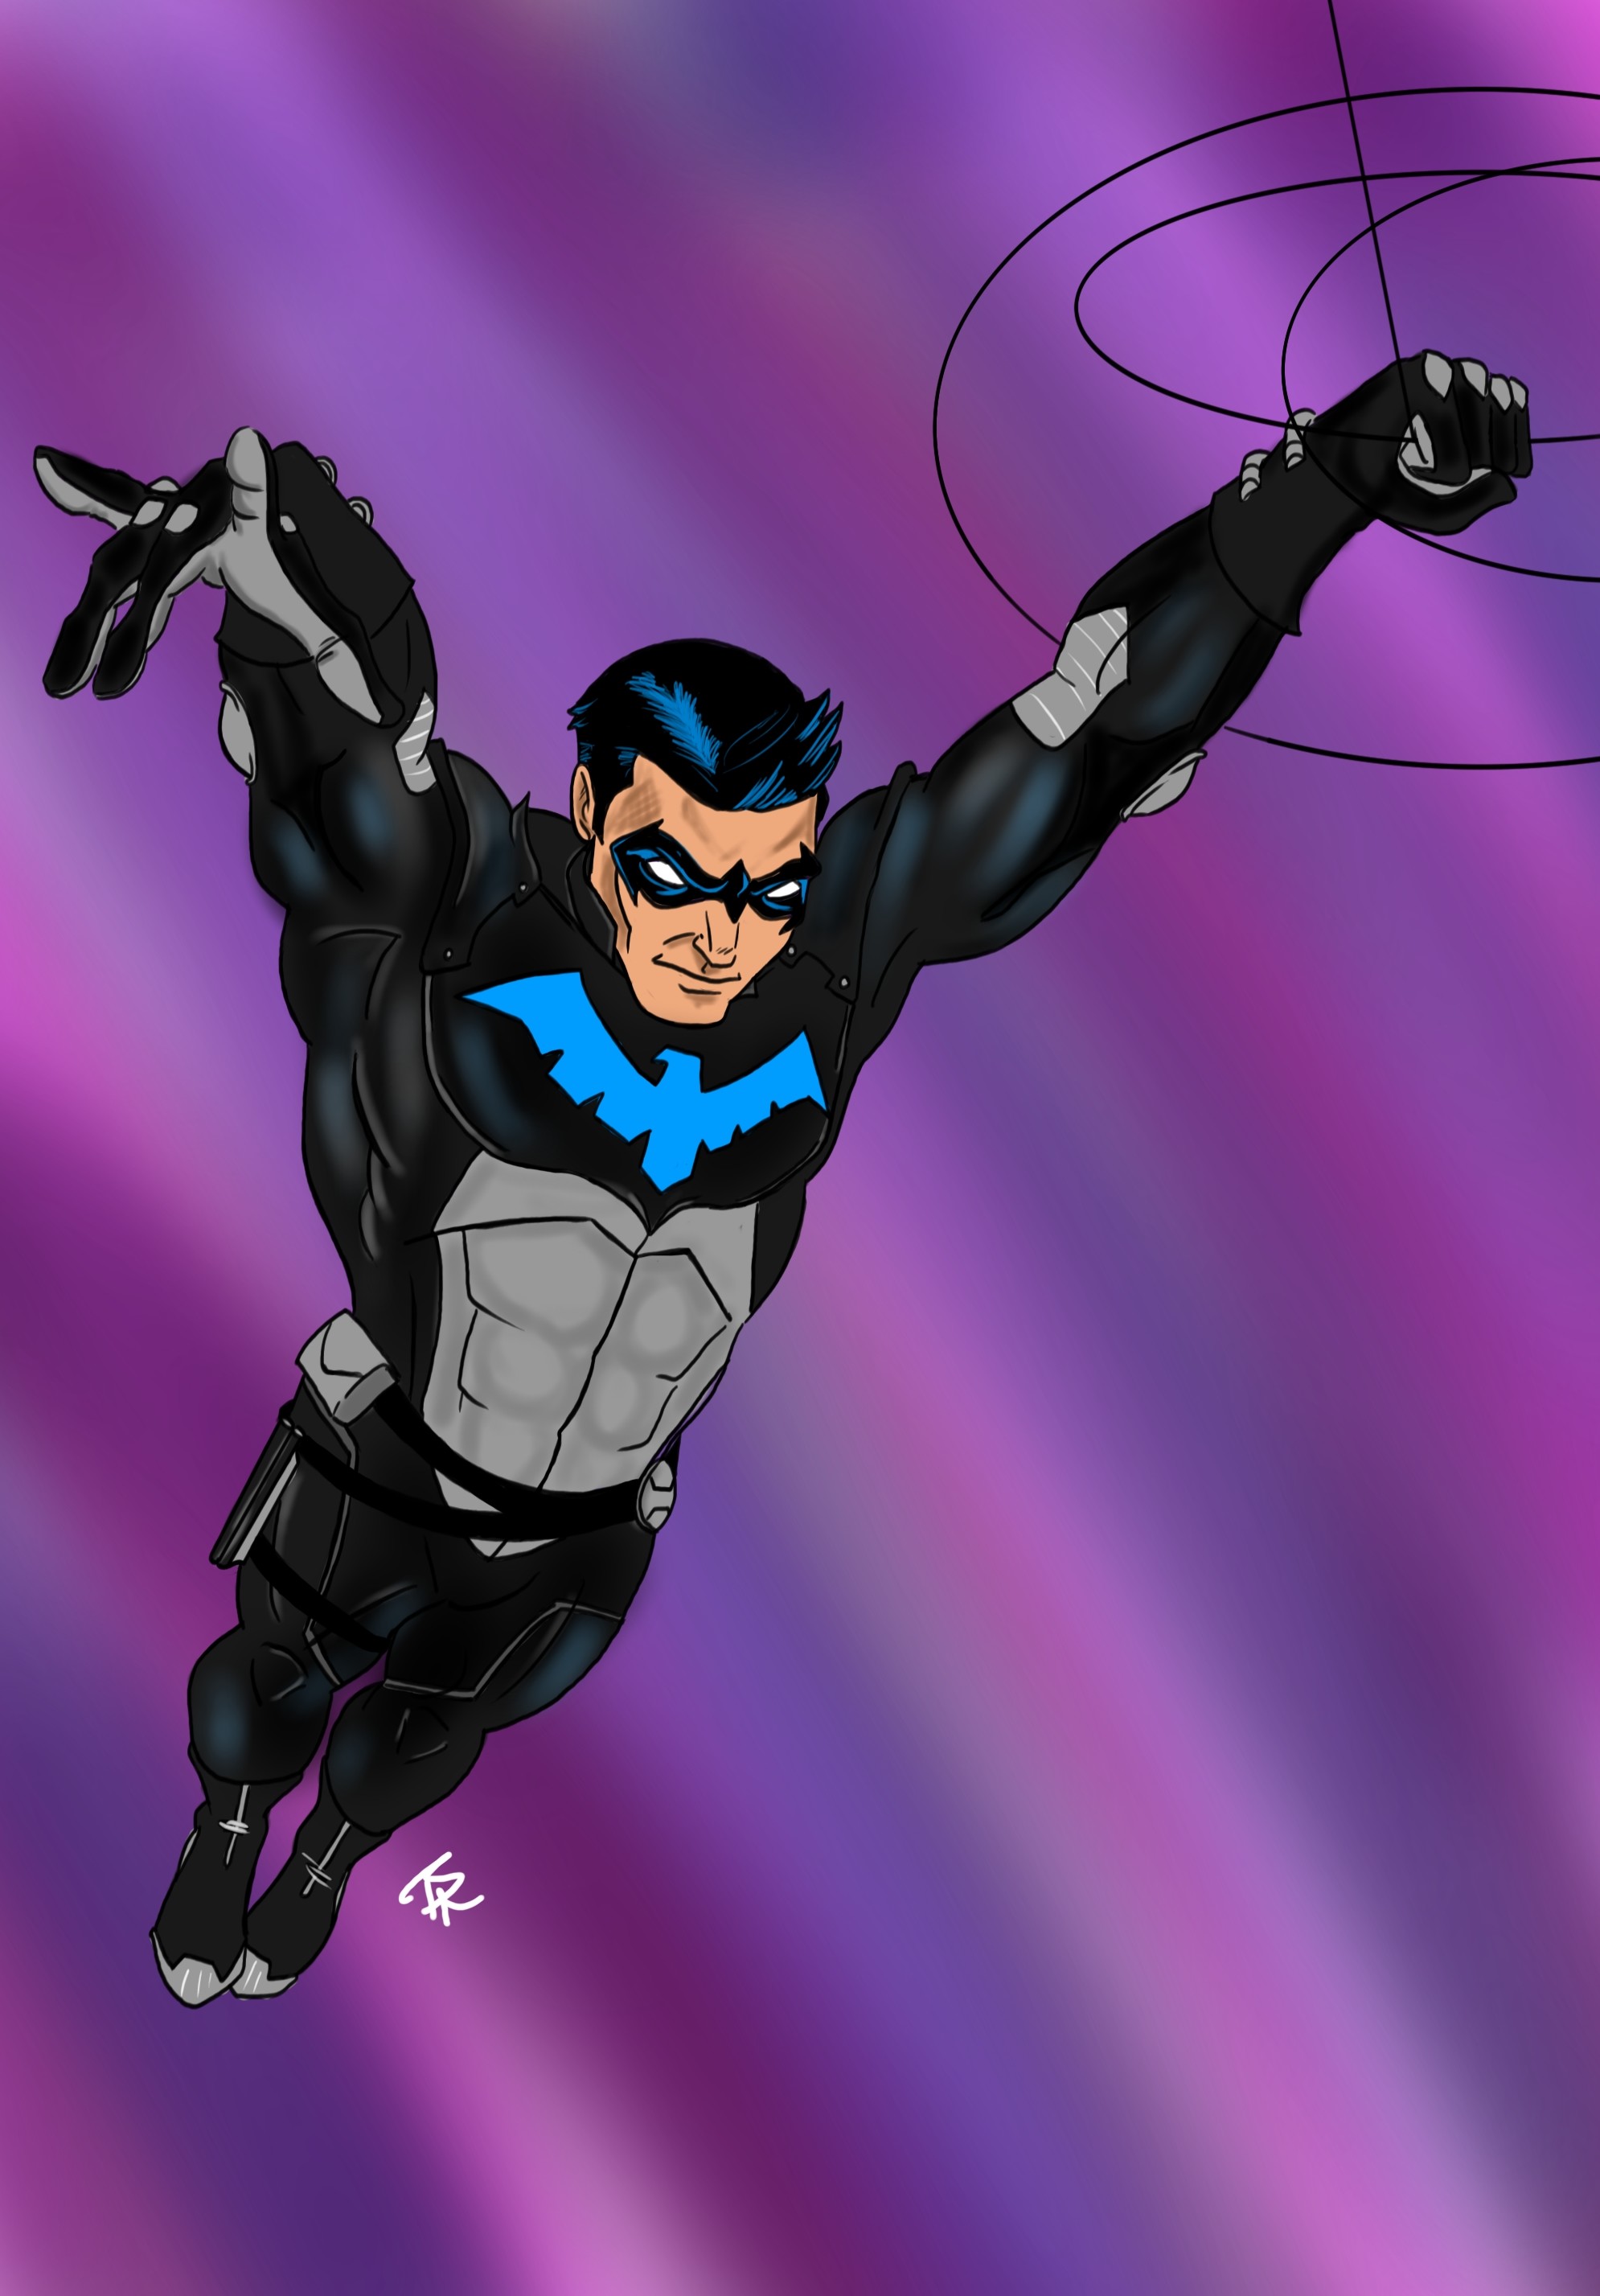 1990x2855 From Young Justice By Young Justice Nightwing Costume Sc 1 St Lacesocial